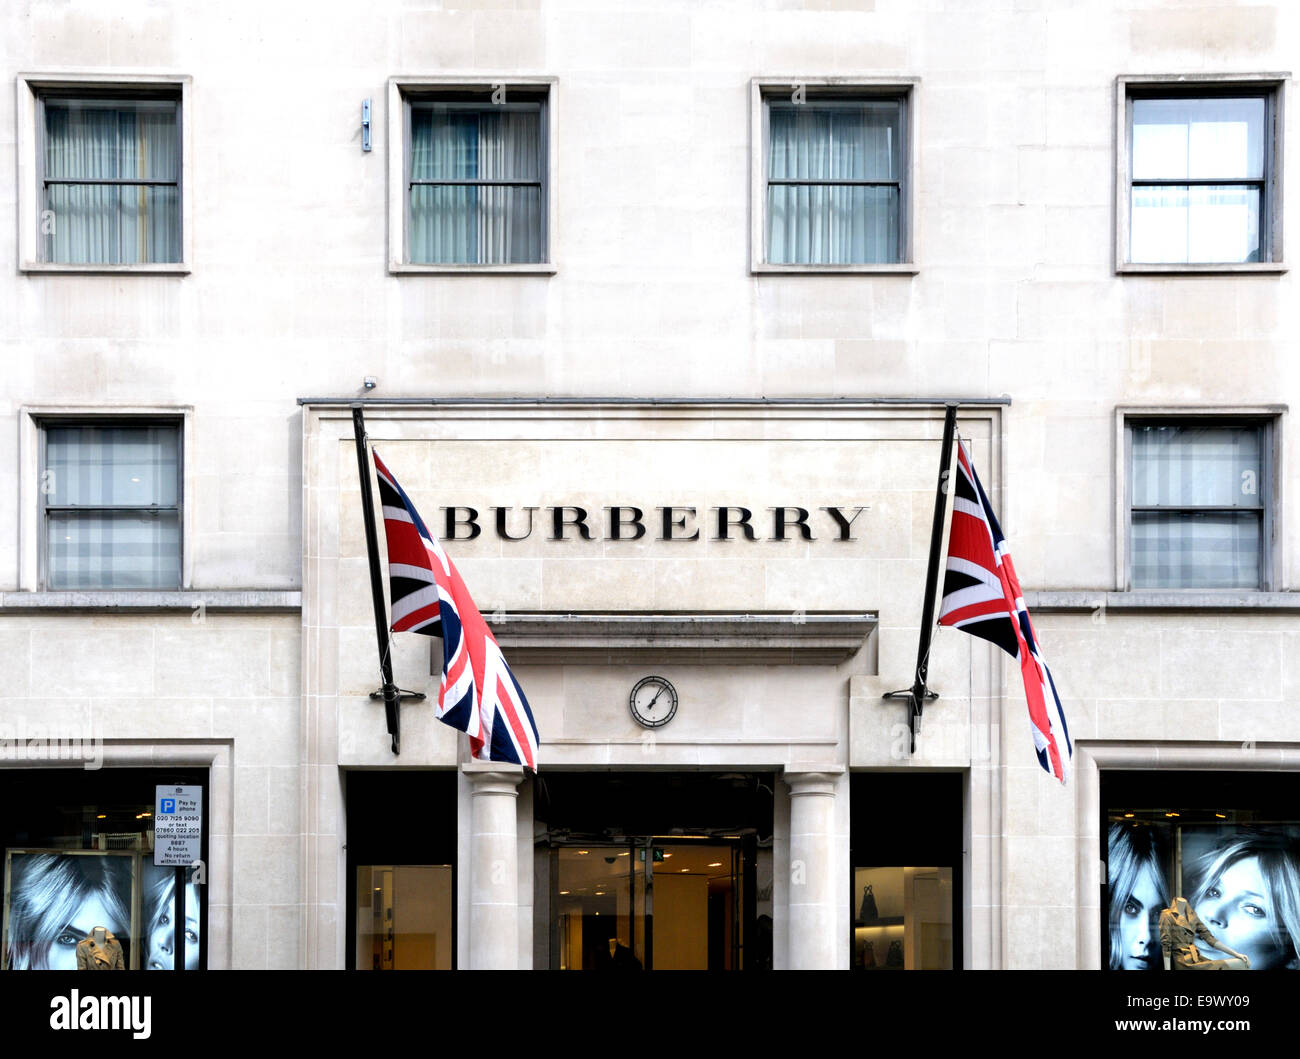 uk burberry Online Shopping for Women, Men, Kids Fashion & Lifestyle|Free  Delivery & Returns! -